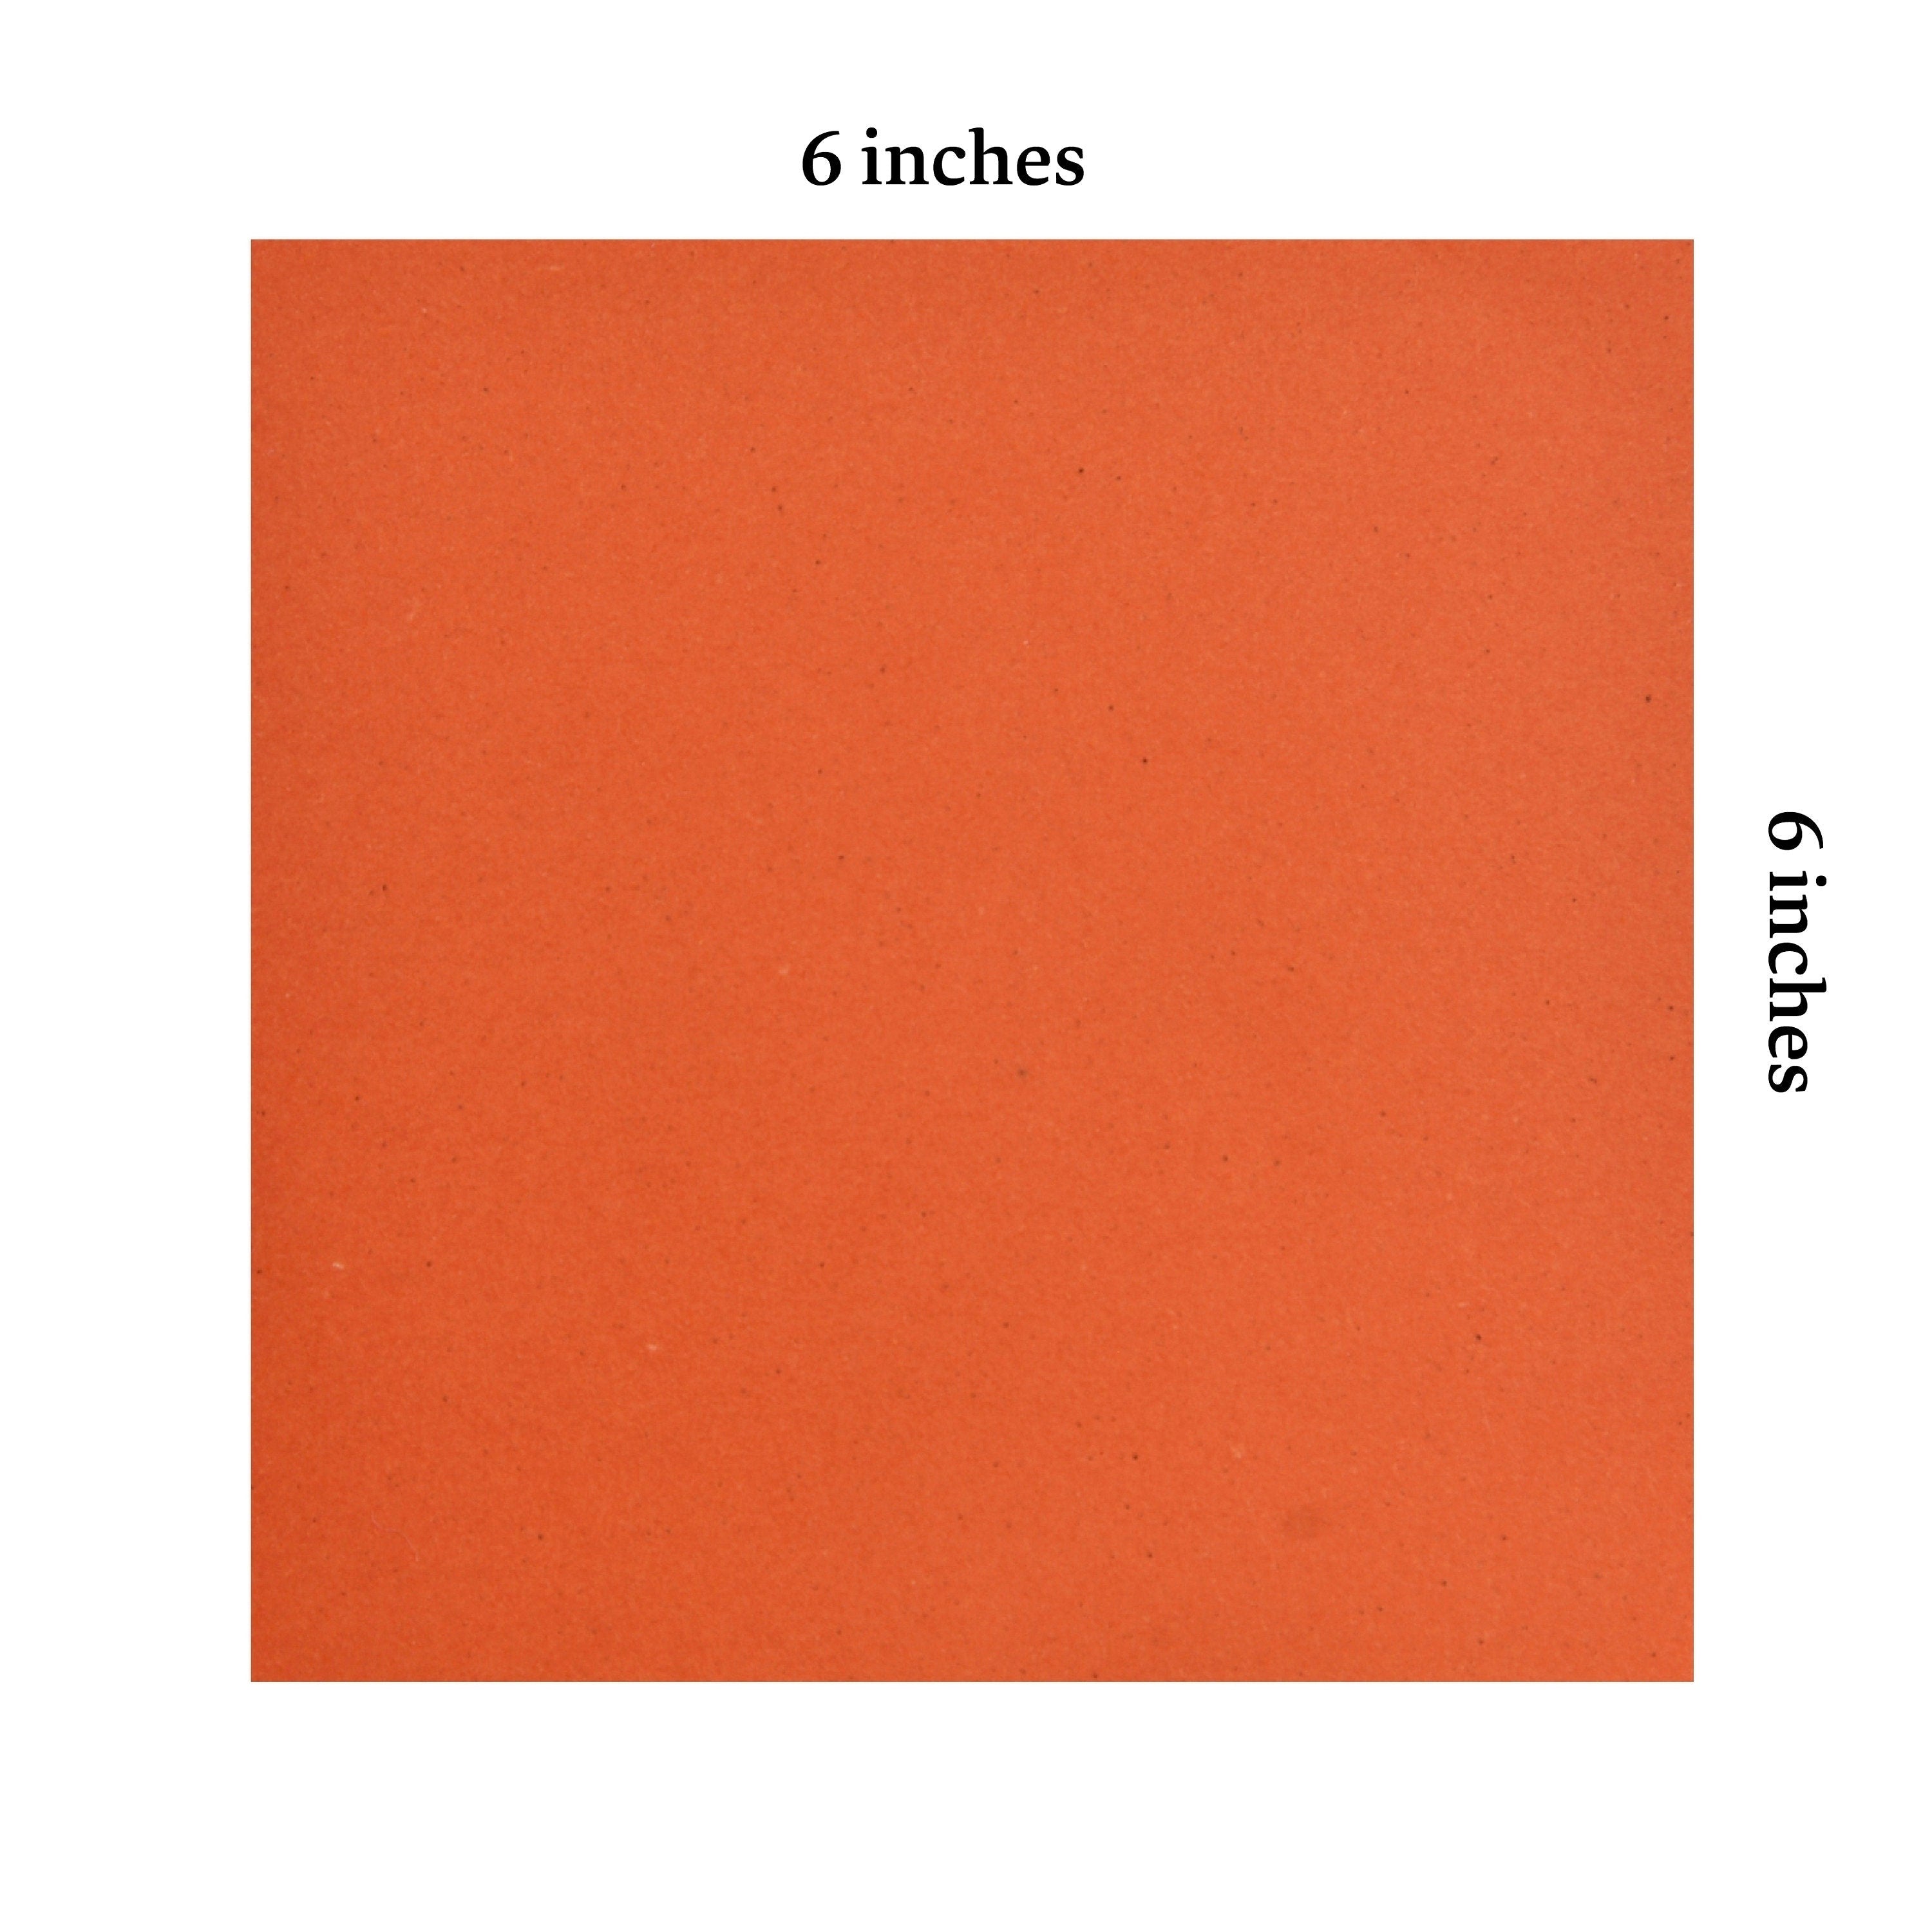 100 Origami Paper Sheets 6x6 inches Square Paper Pack for Folding, Origami Cranes, and Decoration - S04